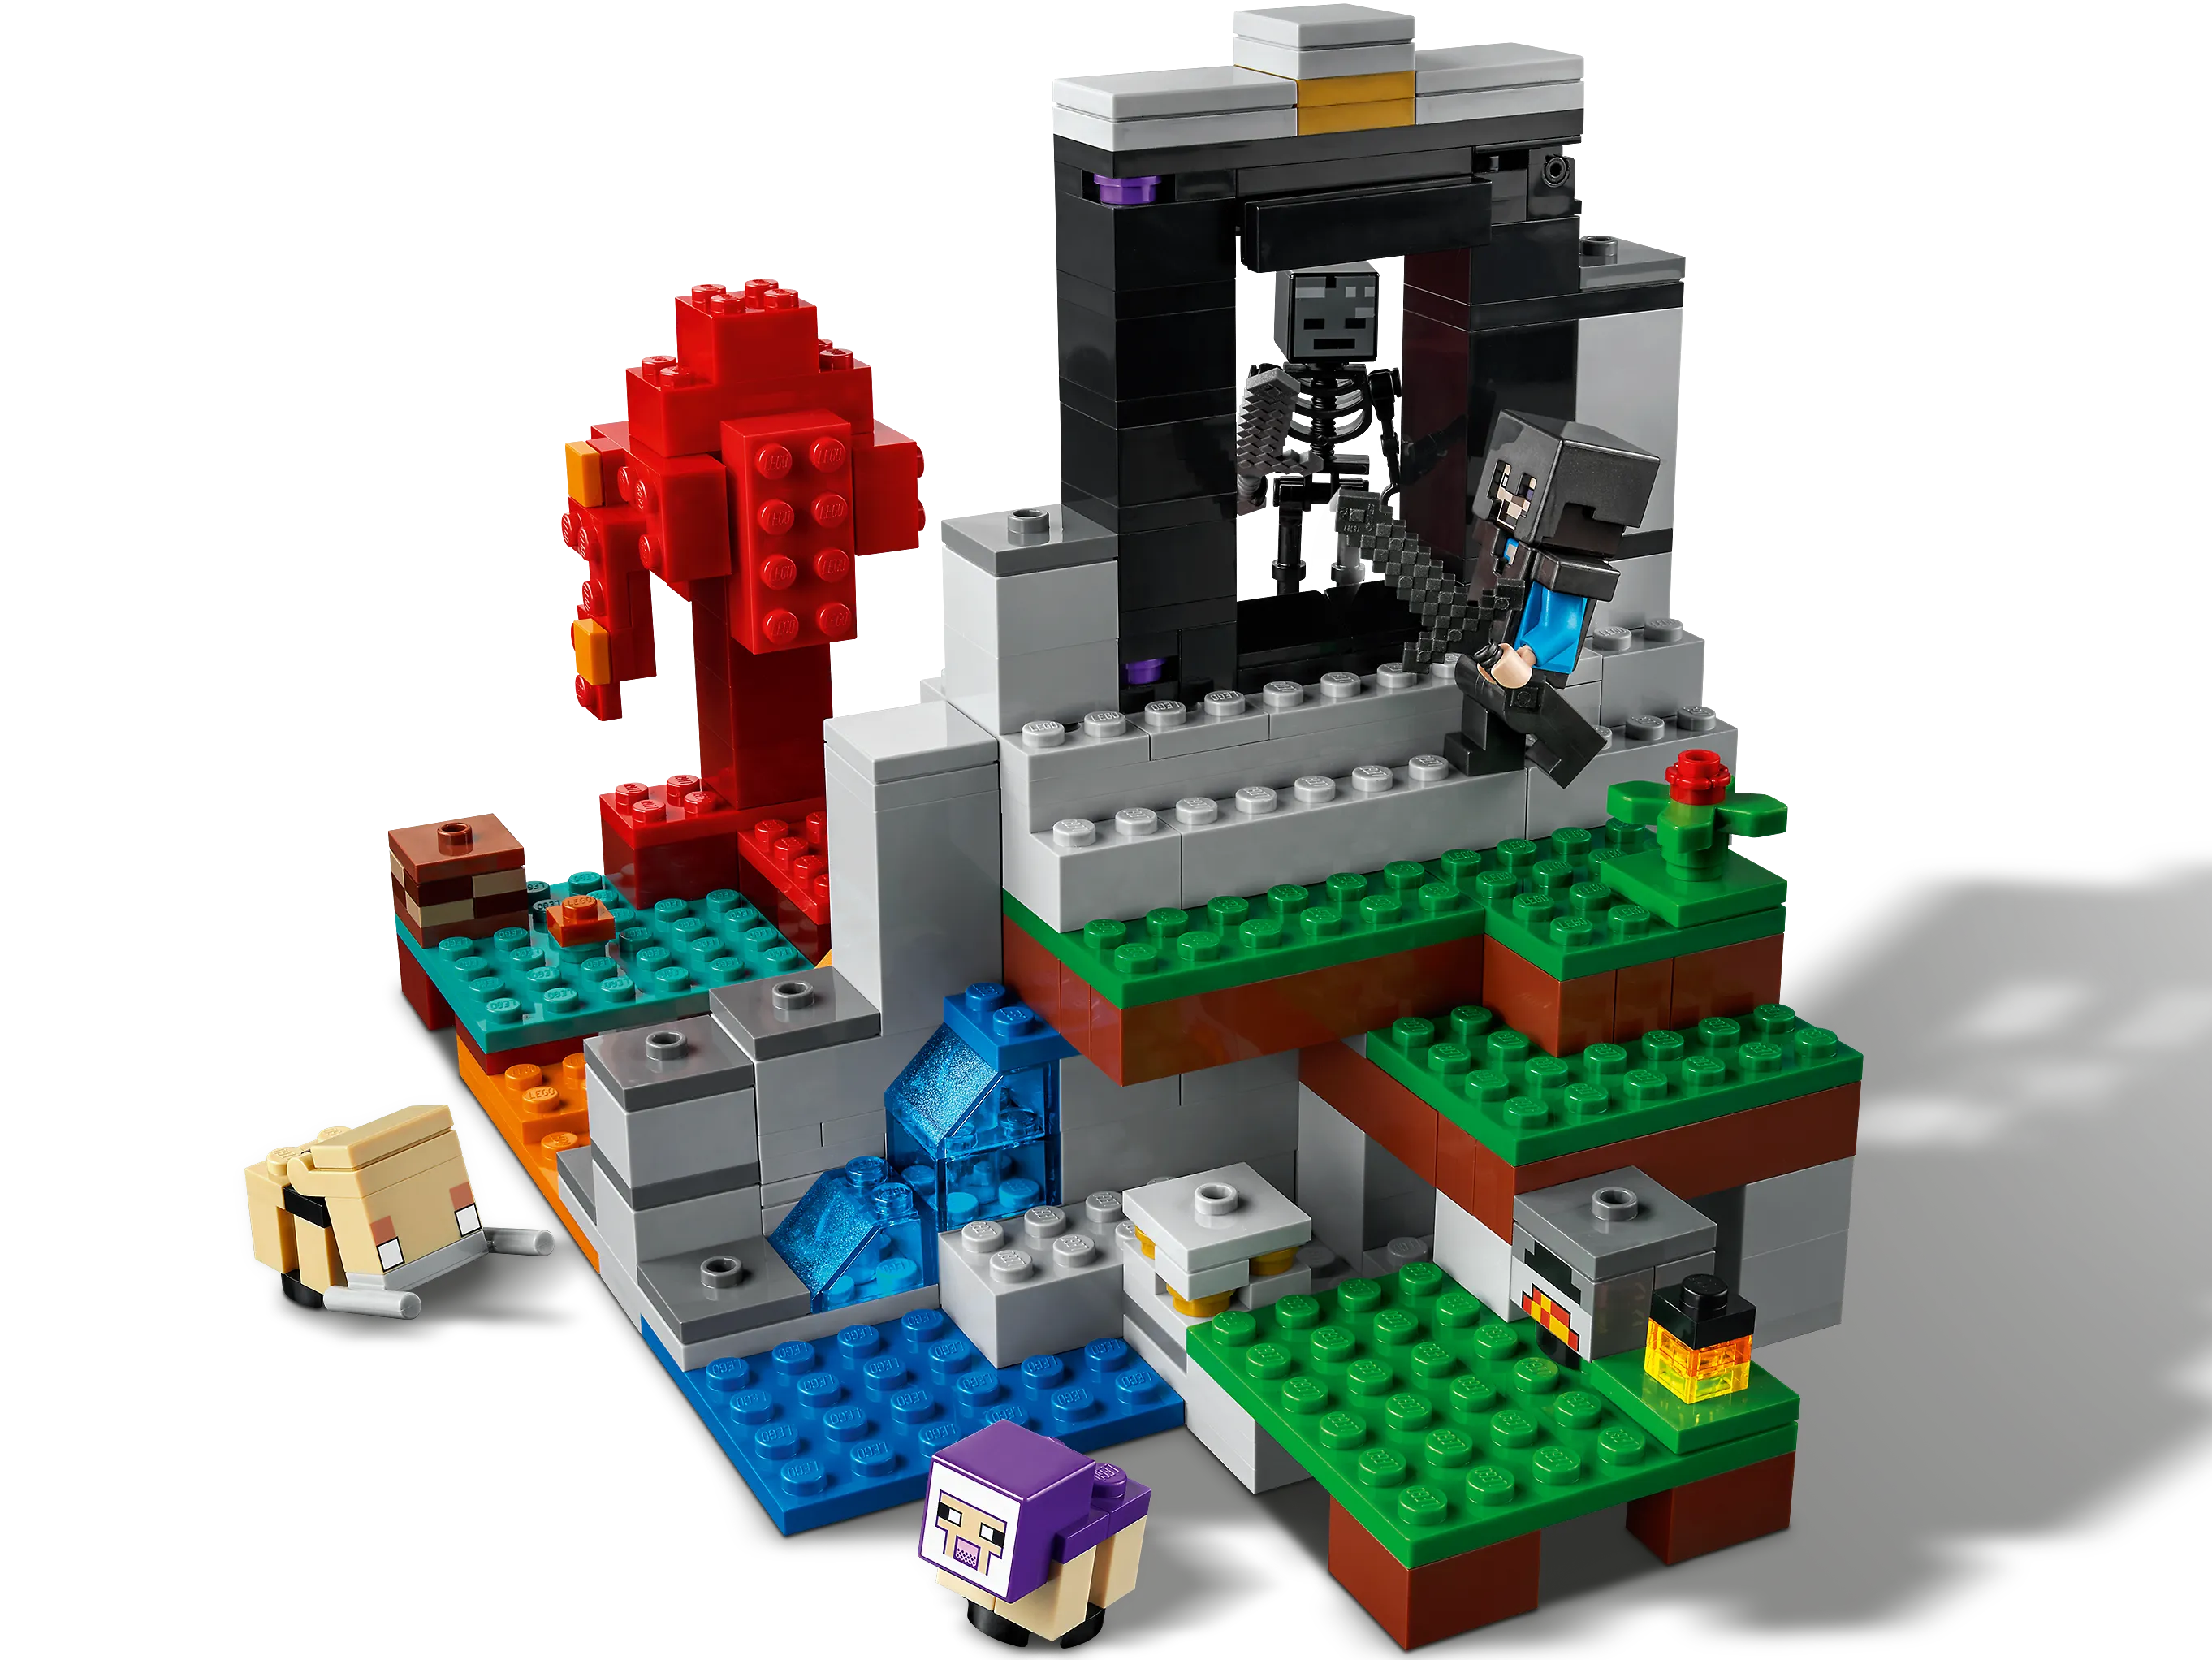 The Wither 21126 - LEGO® Minecraft™ Sets -  for kids